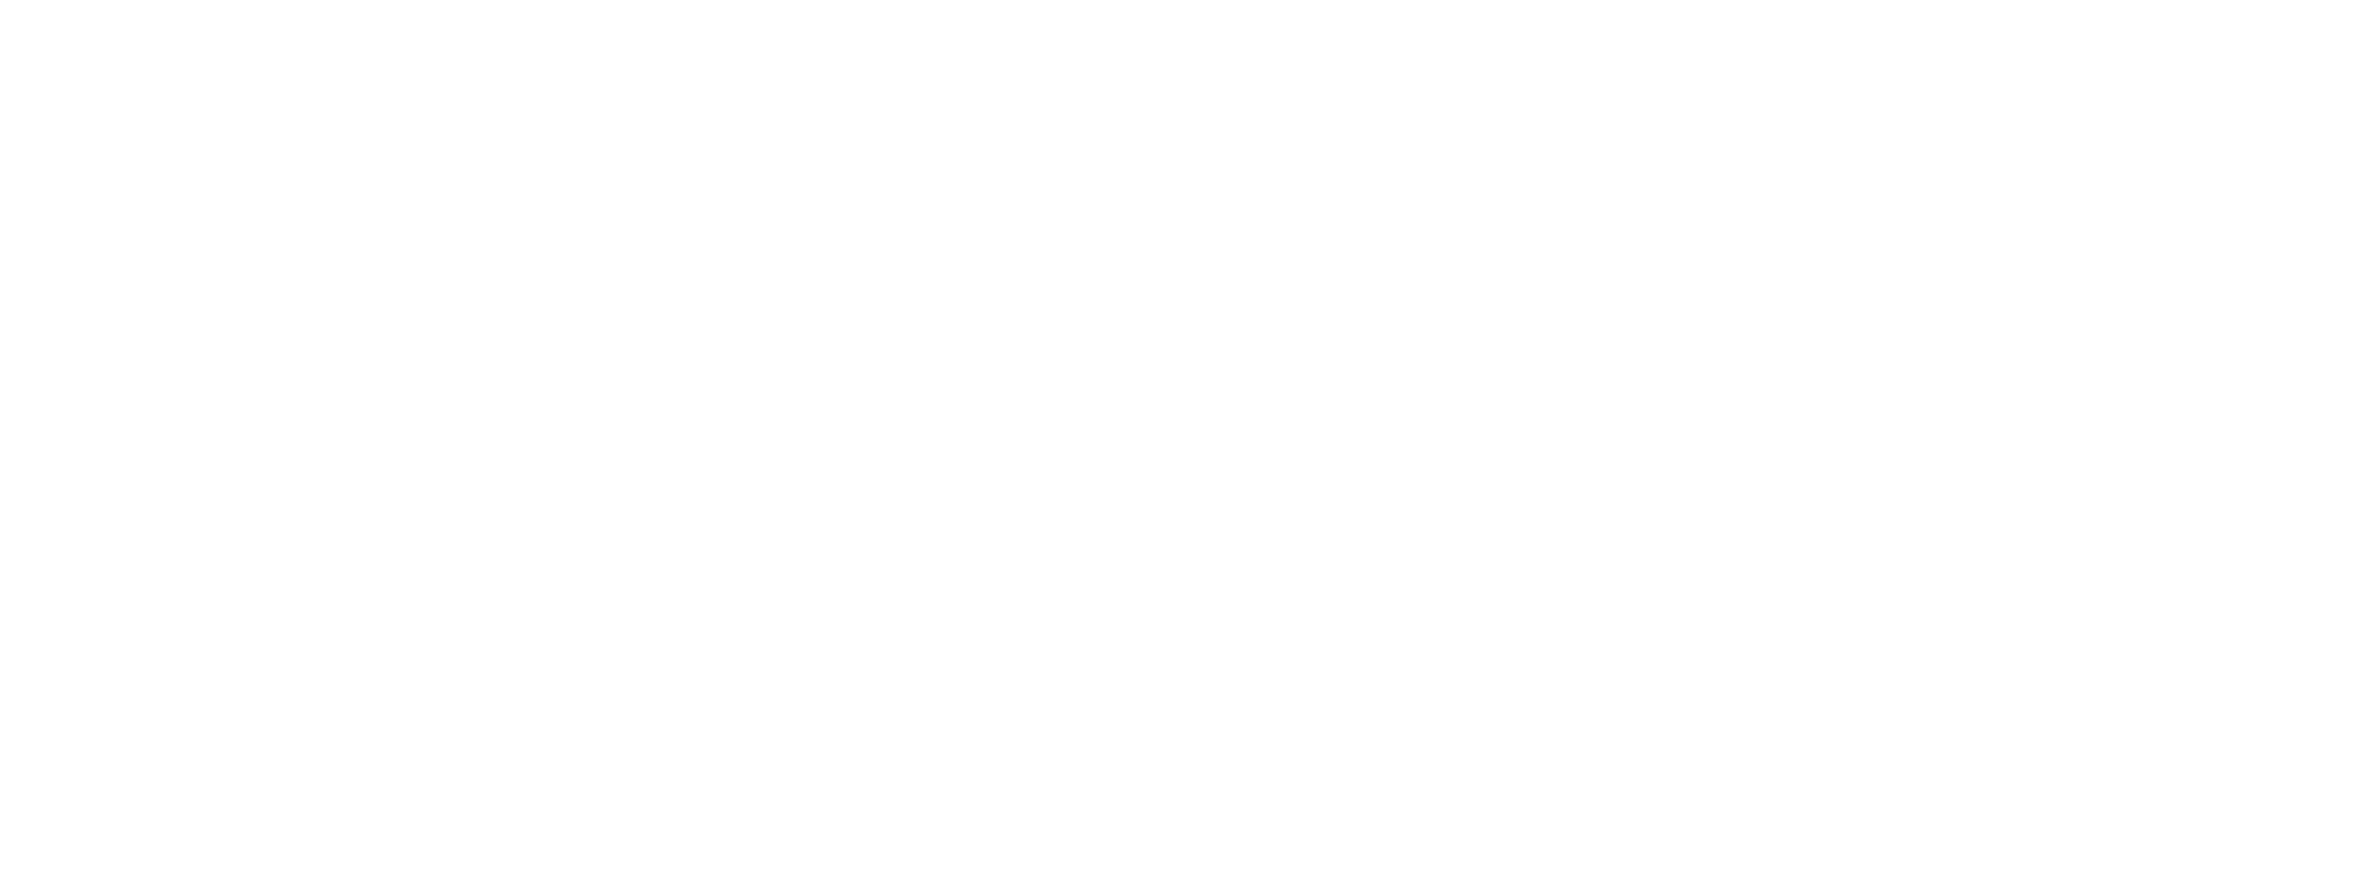 Wolf-Youngblood_RevisedLogo-White.png